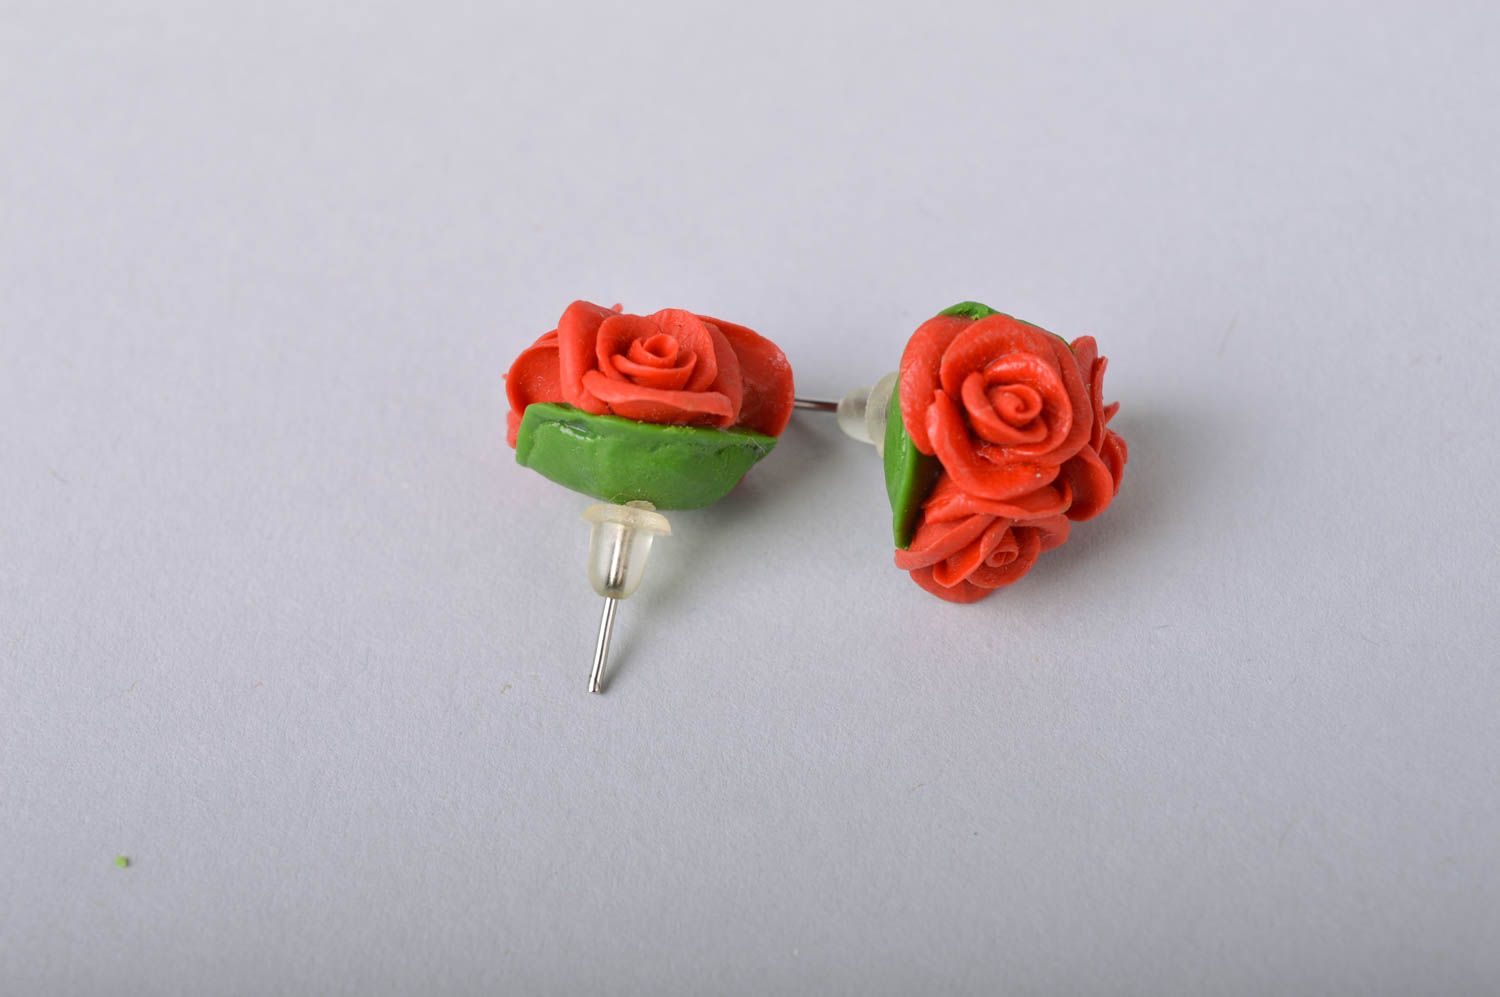 Handmade flower stud earrings made of cold porcelain in shape of red roses photo 5